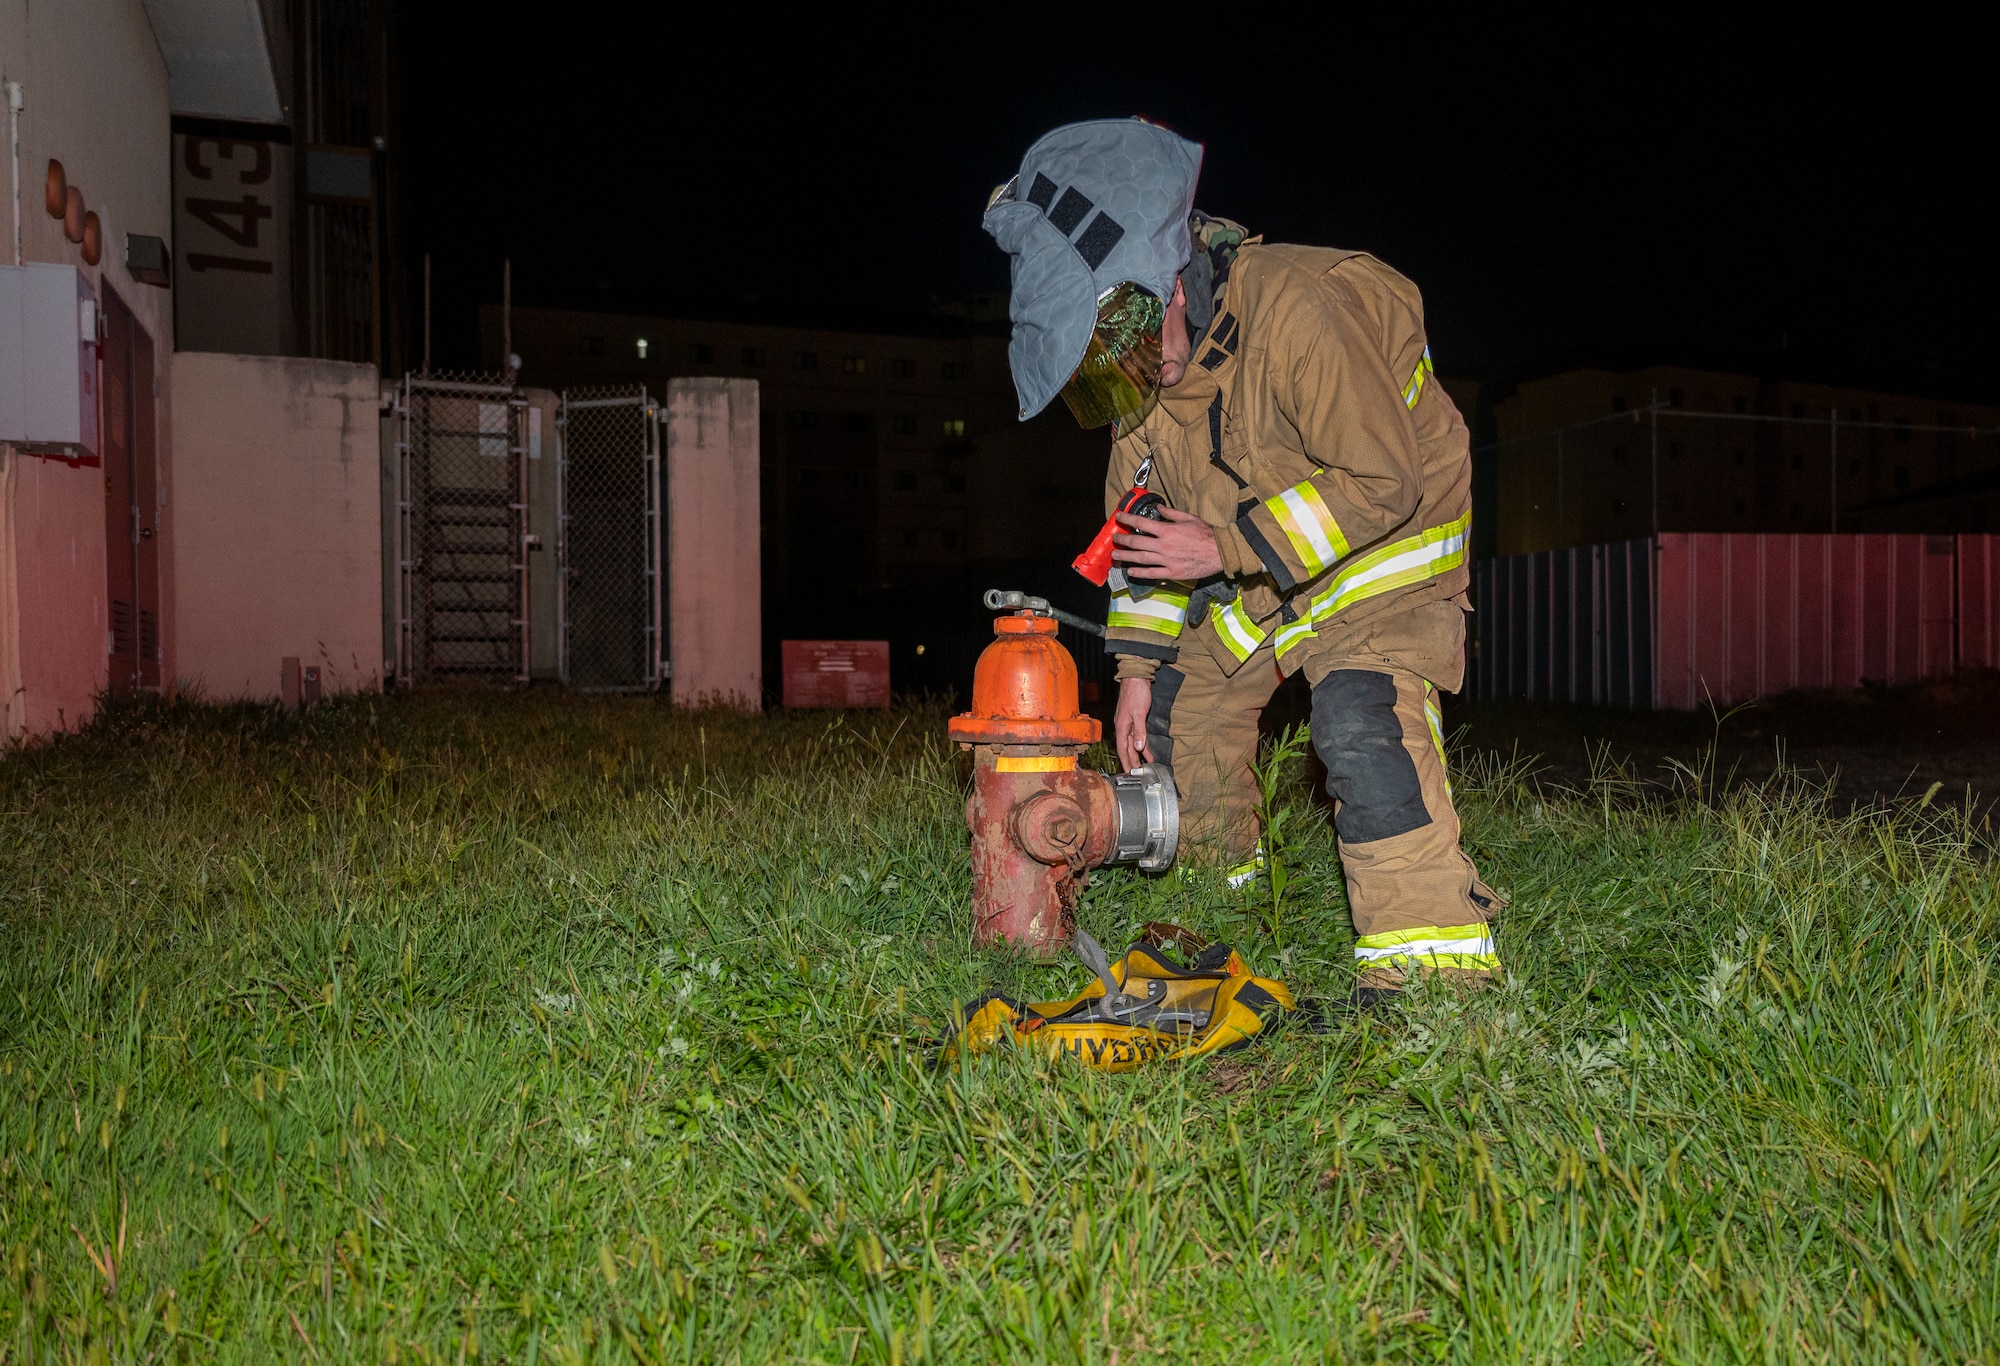 U.S. Air Force Airman 1st Class Brendan Casserly, 51st Civil Engineer Squadron firefighter, opens a fire hydrant during a fire response scenario at Osan Air Base, Republic of Korea, Sept. 14, 2022.